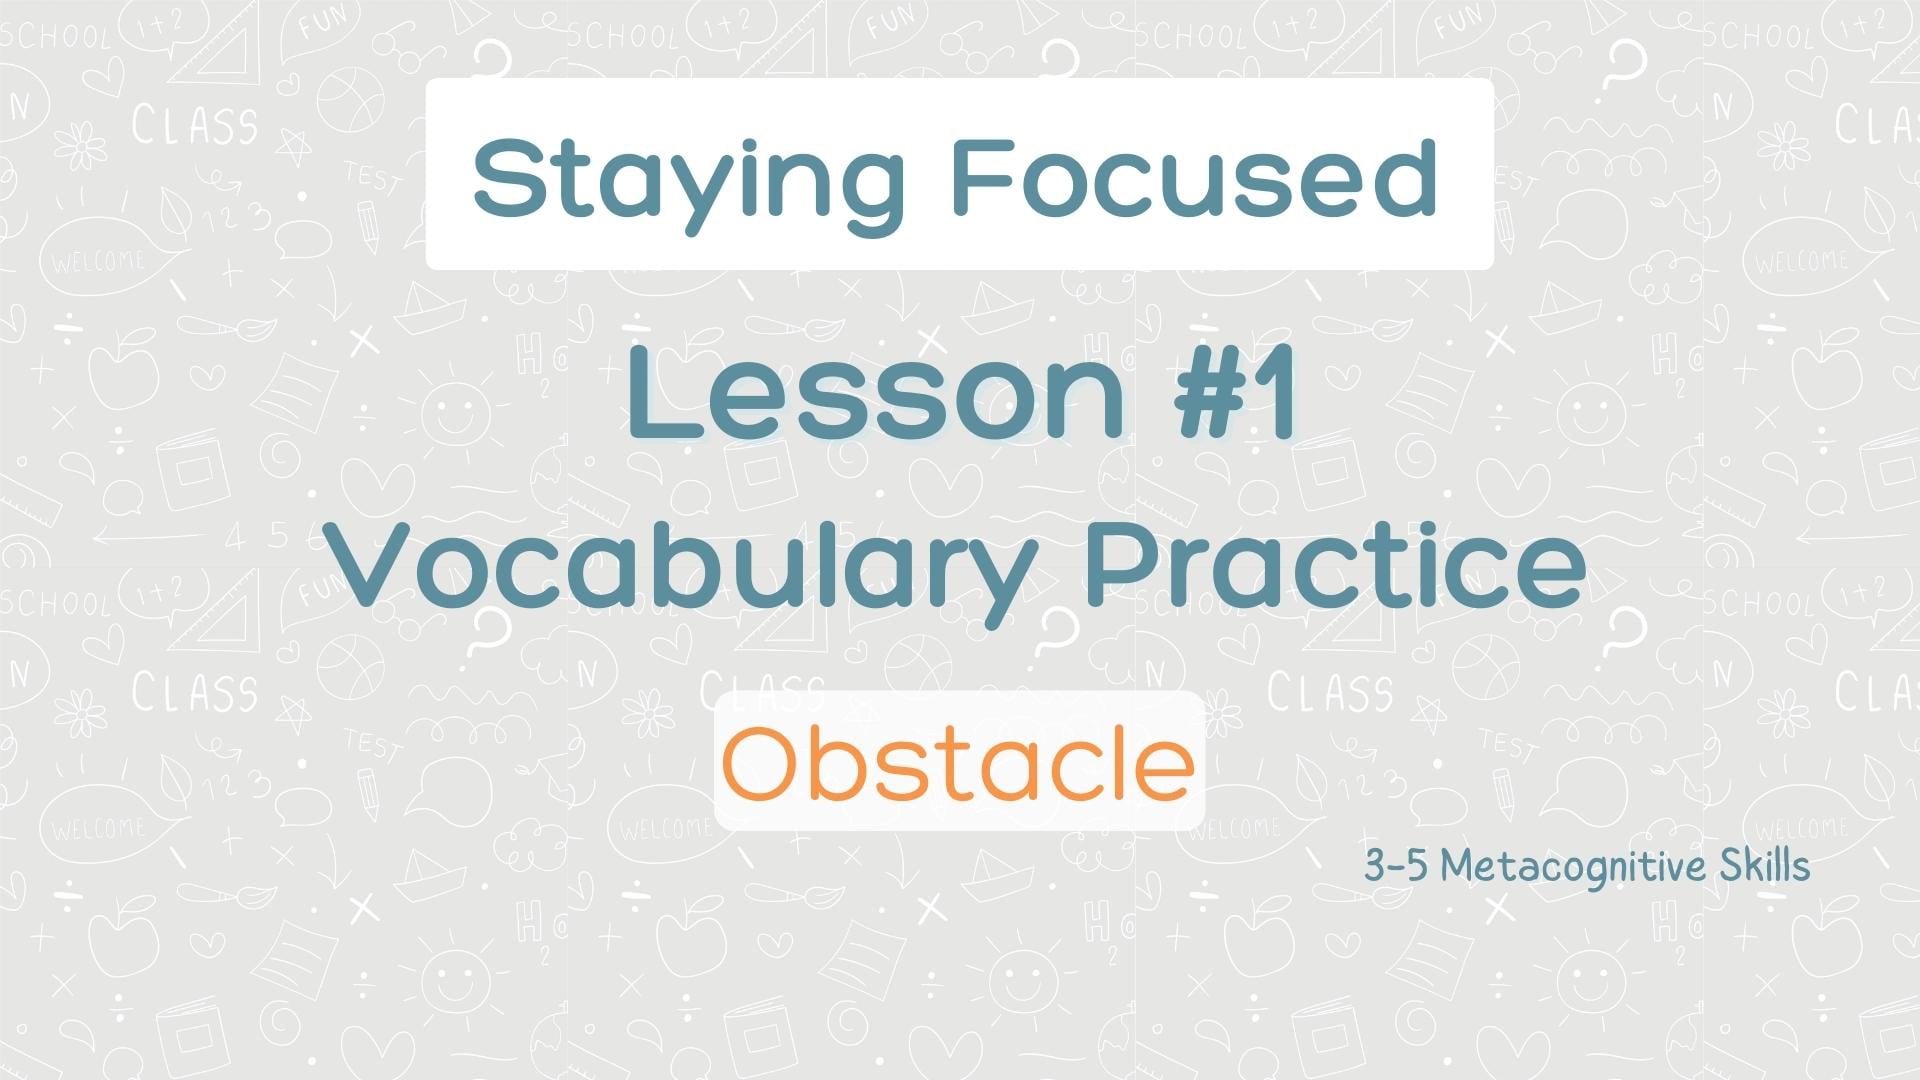 Lesson #1 Vocabulary Practice: Obstacle video thumbnail